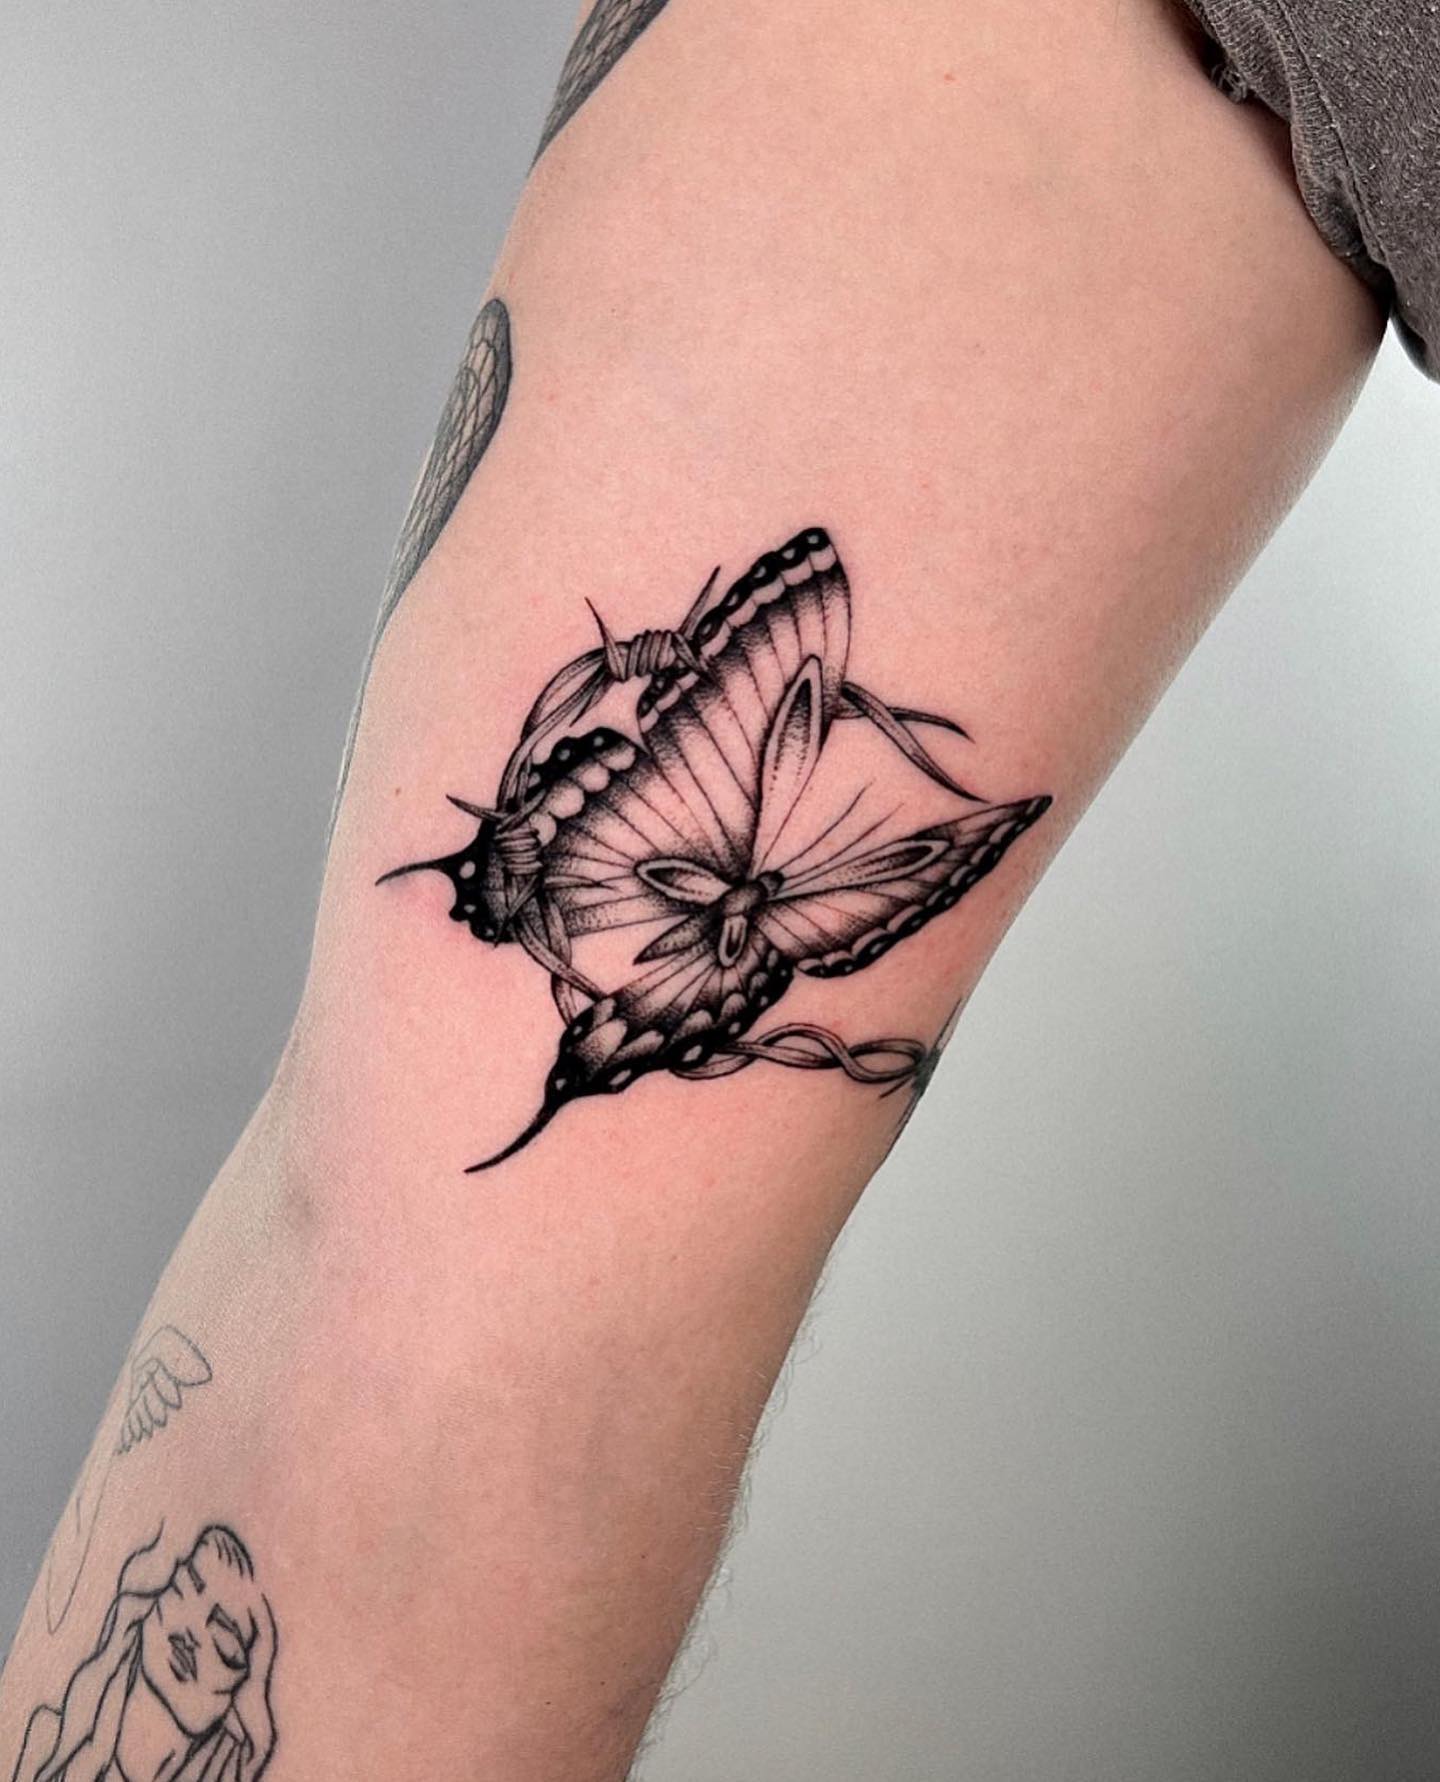 It is definitely a tattoo done by a great tattooist. The details of butterfly and barbed wire make this artwork look so real that it makes you to touch to see if it is real. The barbed wire surrounds the butterfly and protects it from any damage since it is a very delicate animal.